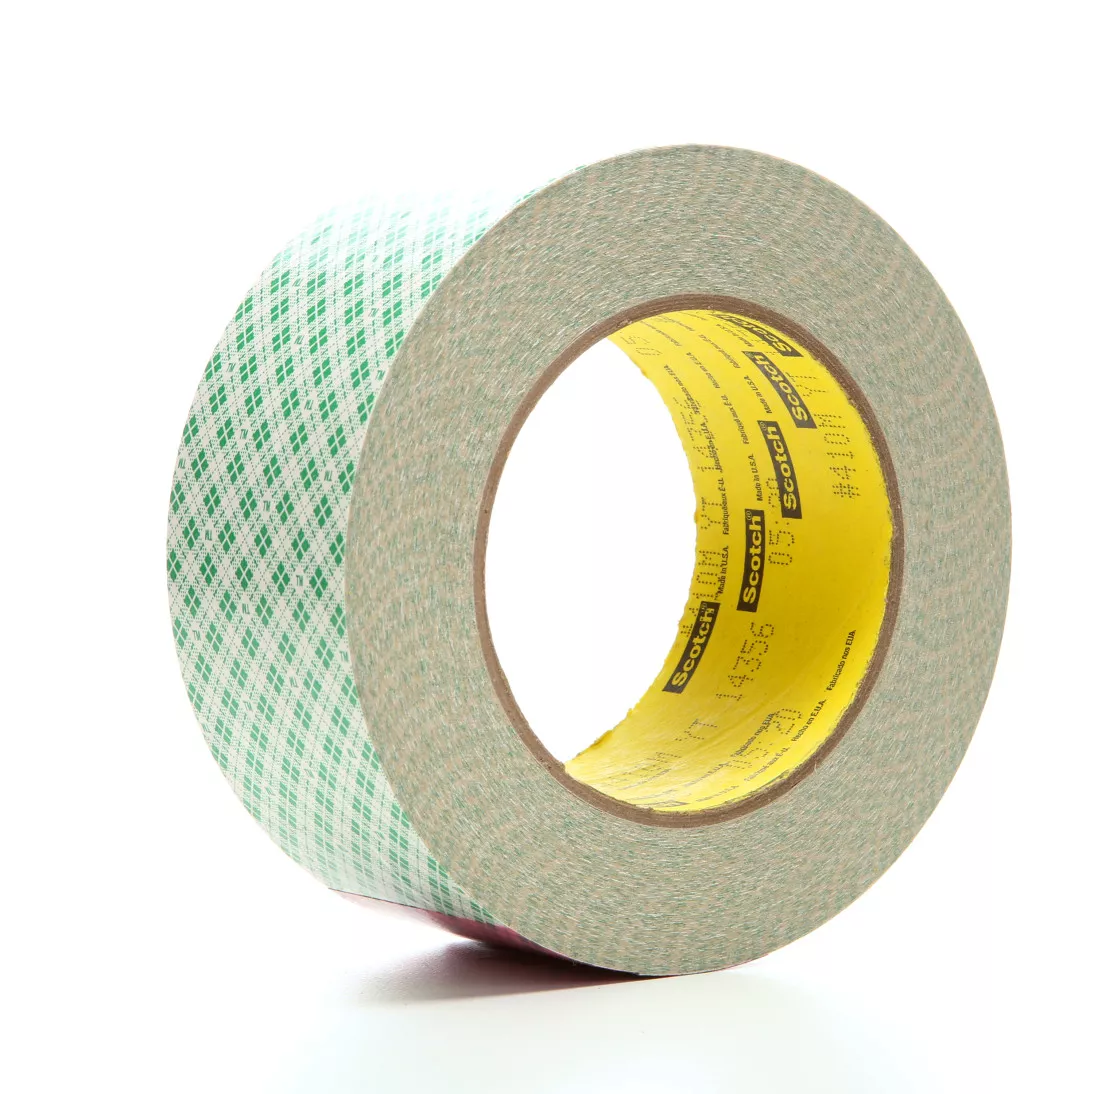 3M™ Double Coated Paper Tape 410M, Natural, 2 in x 36 yd, 5 mil, 24
rolls per case